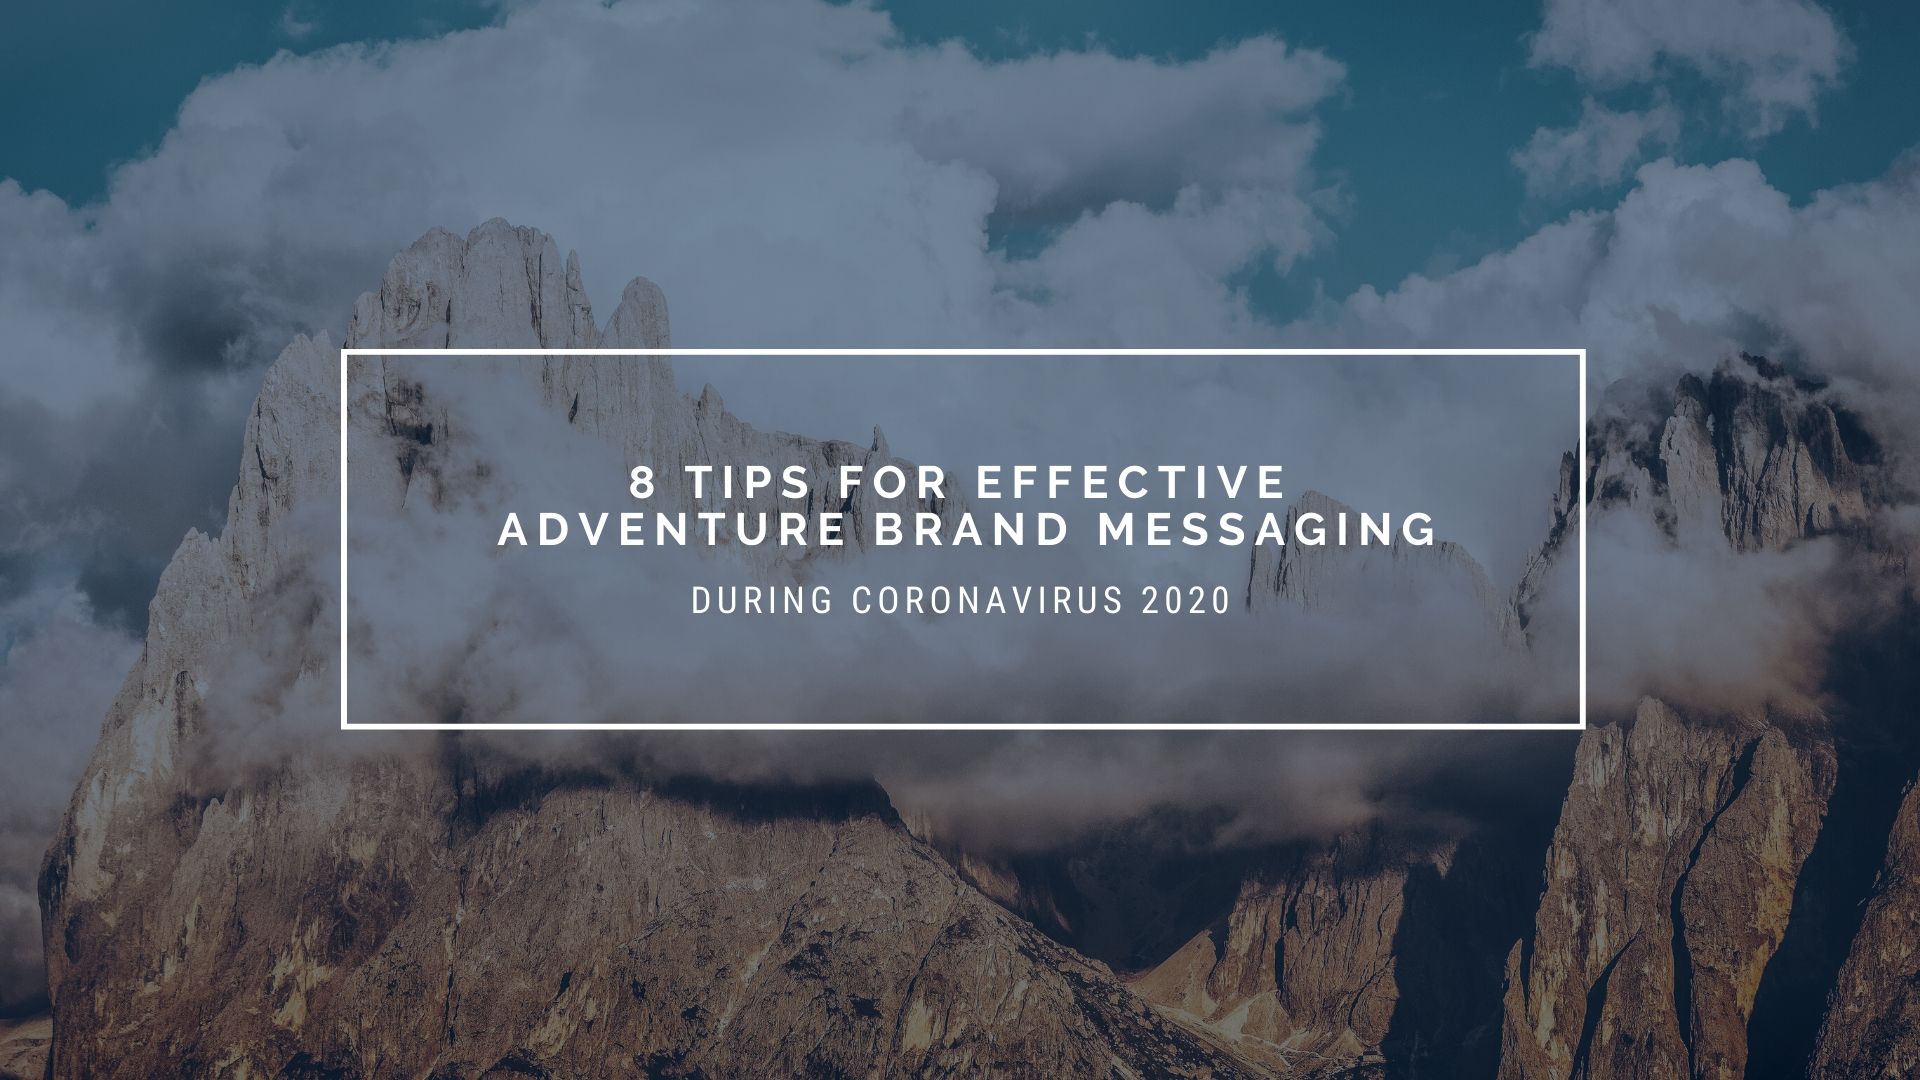 8 Tips for Effective Adventure Brand Messaging during COVID-19